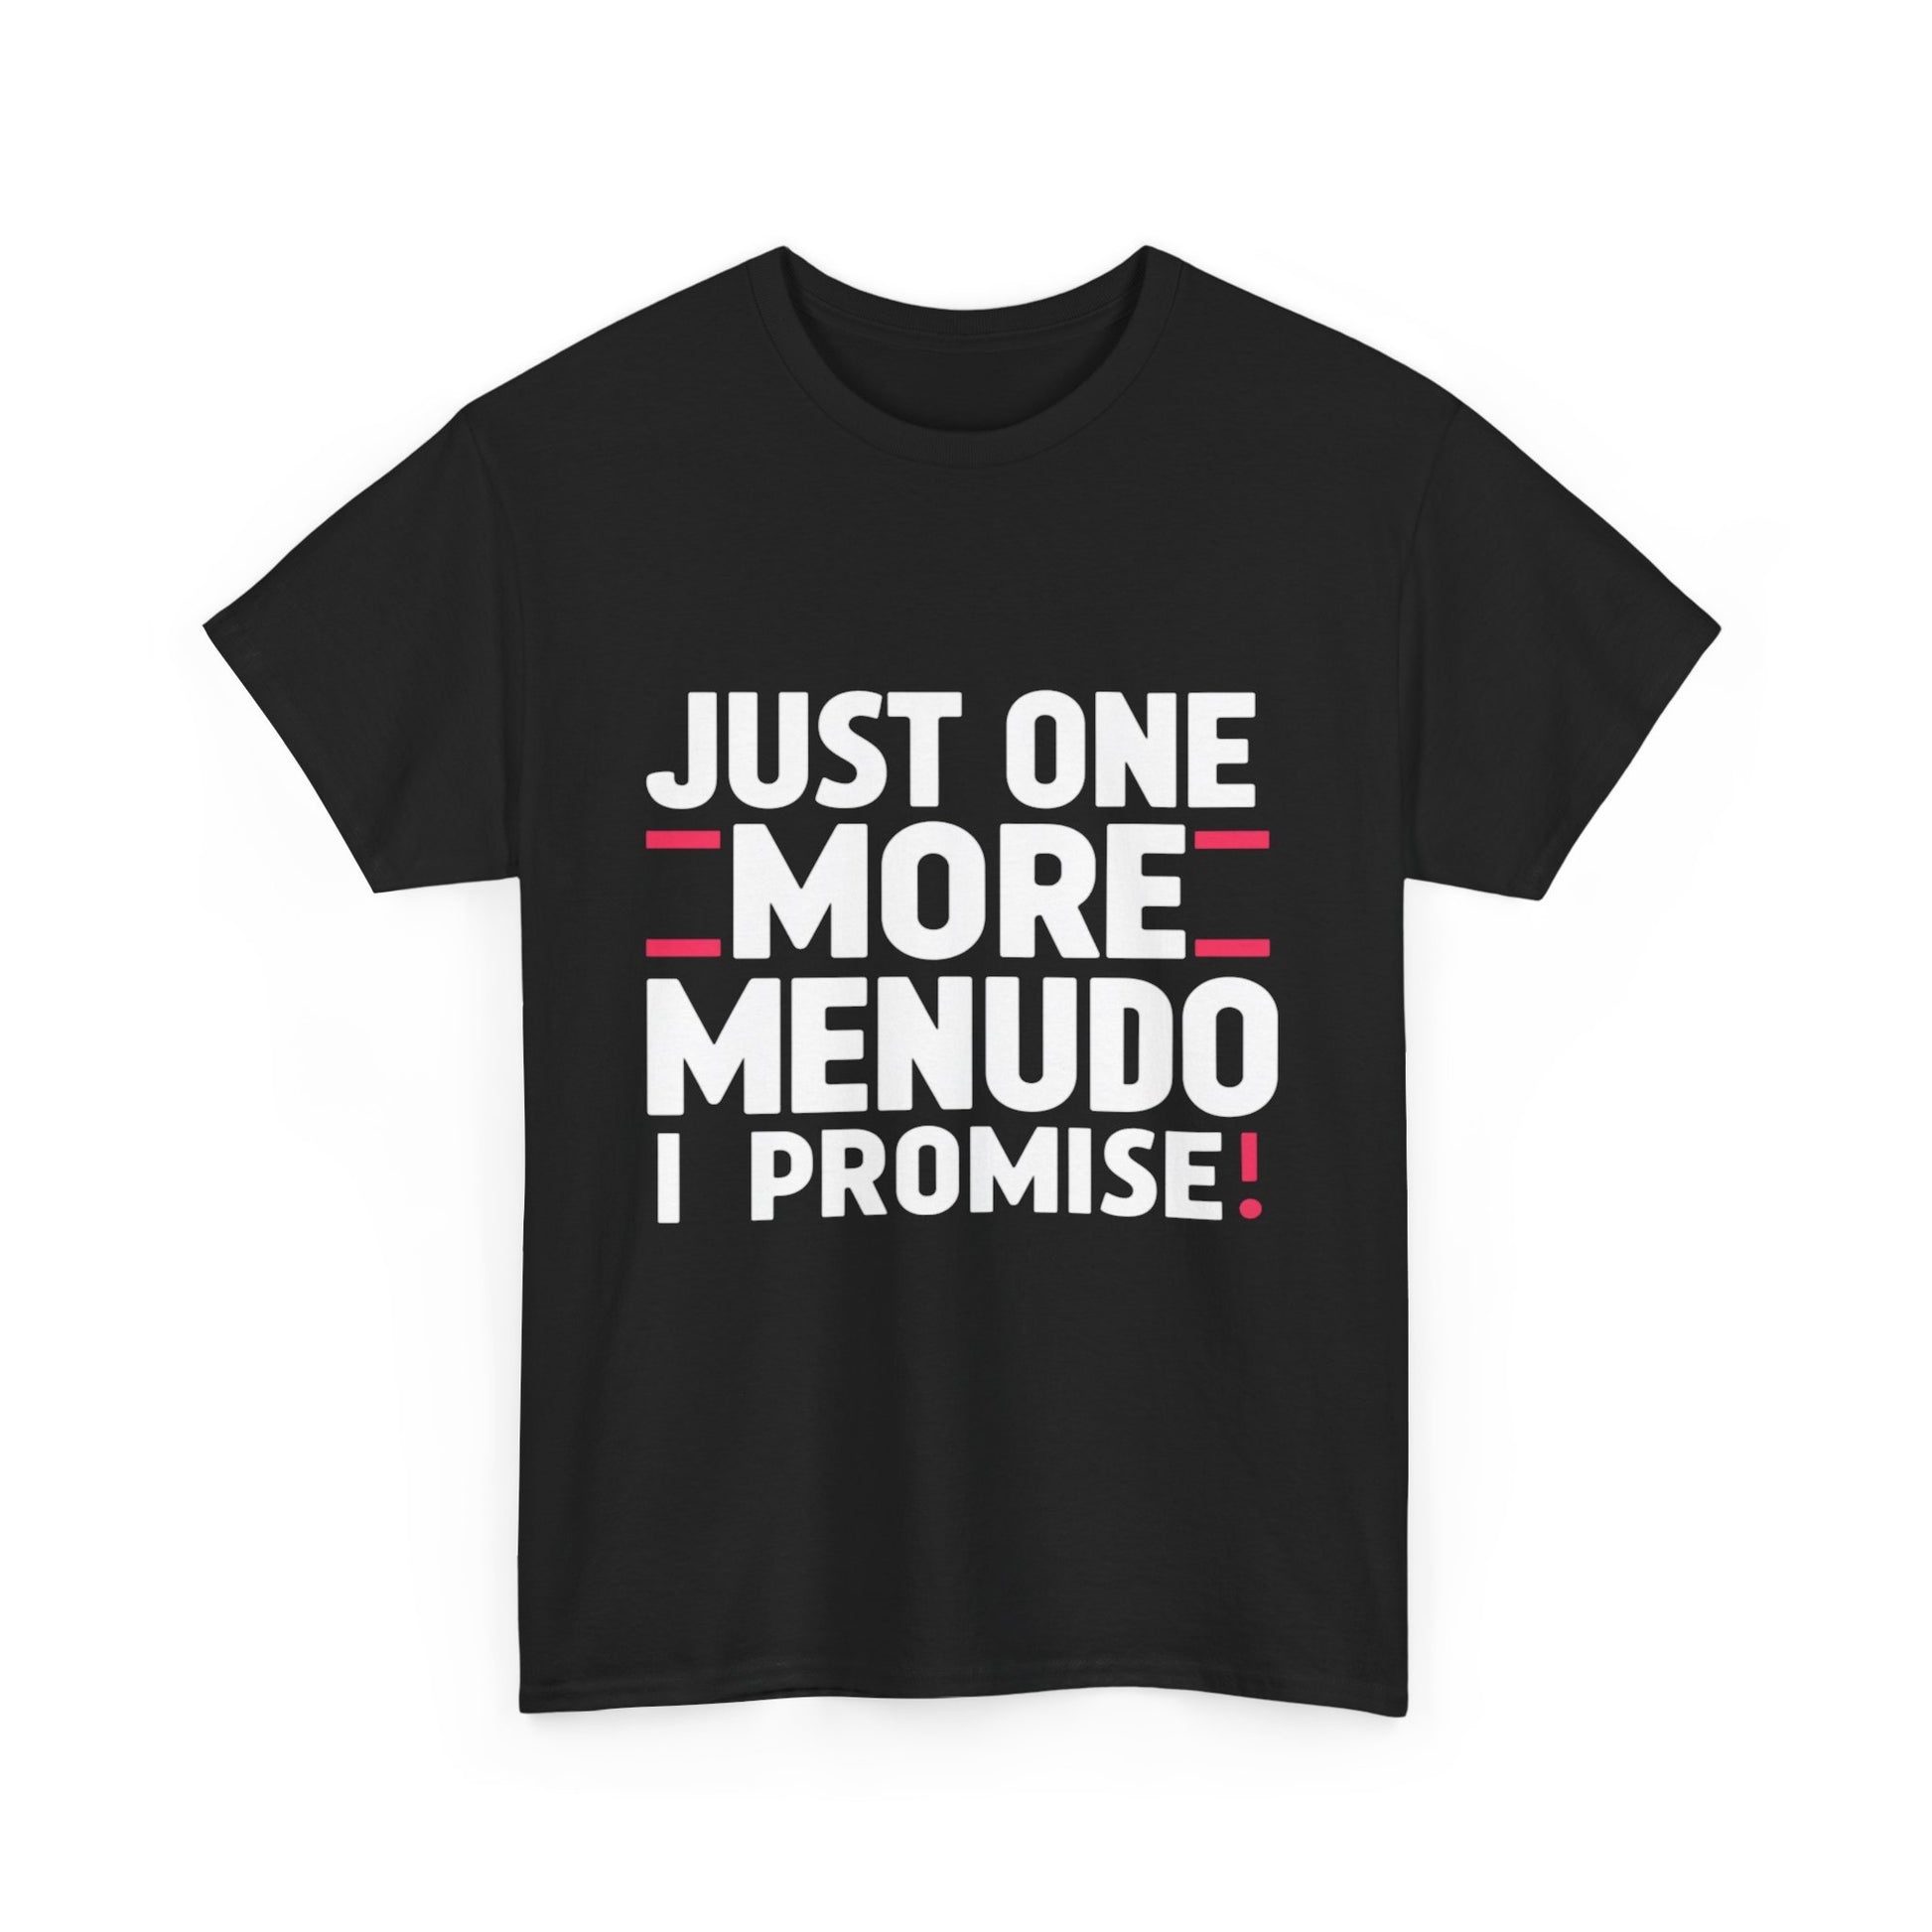 Just One More Menudo I Promise Mexican Food Graphic Unisex Heavy Cotton Tee Cotton Funny Humorous Graphic Soft Premium Unisex Men Women Black T-shirt Birthday Gift-15